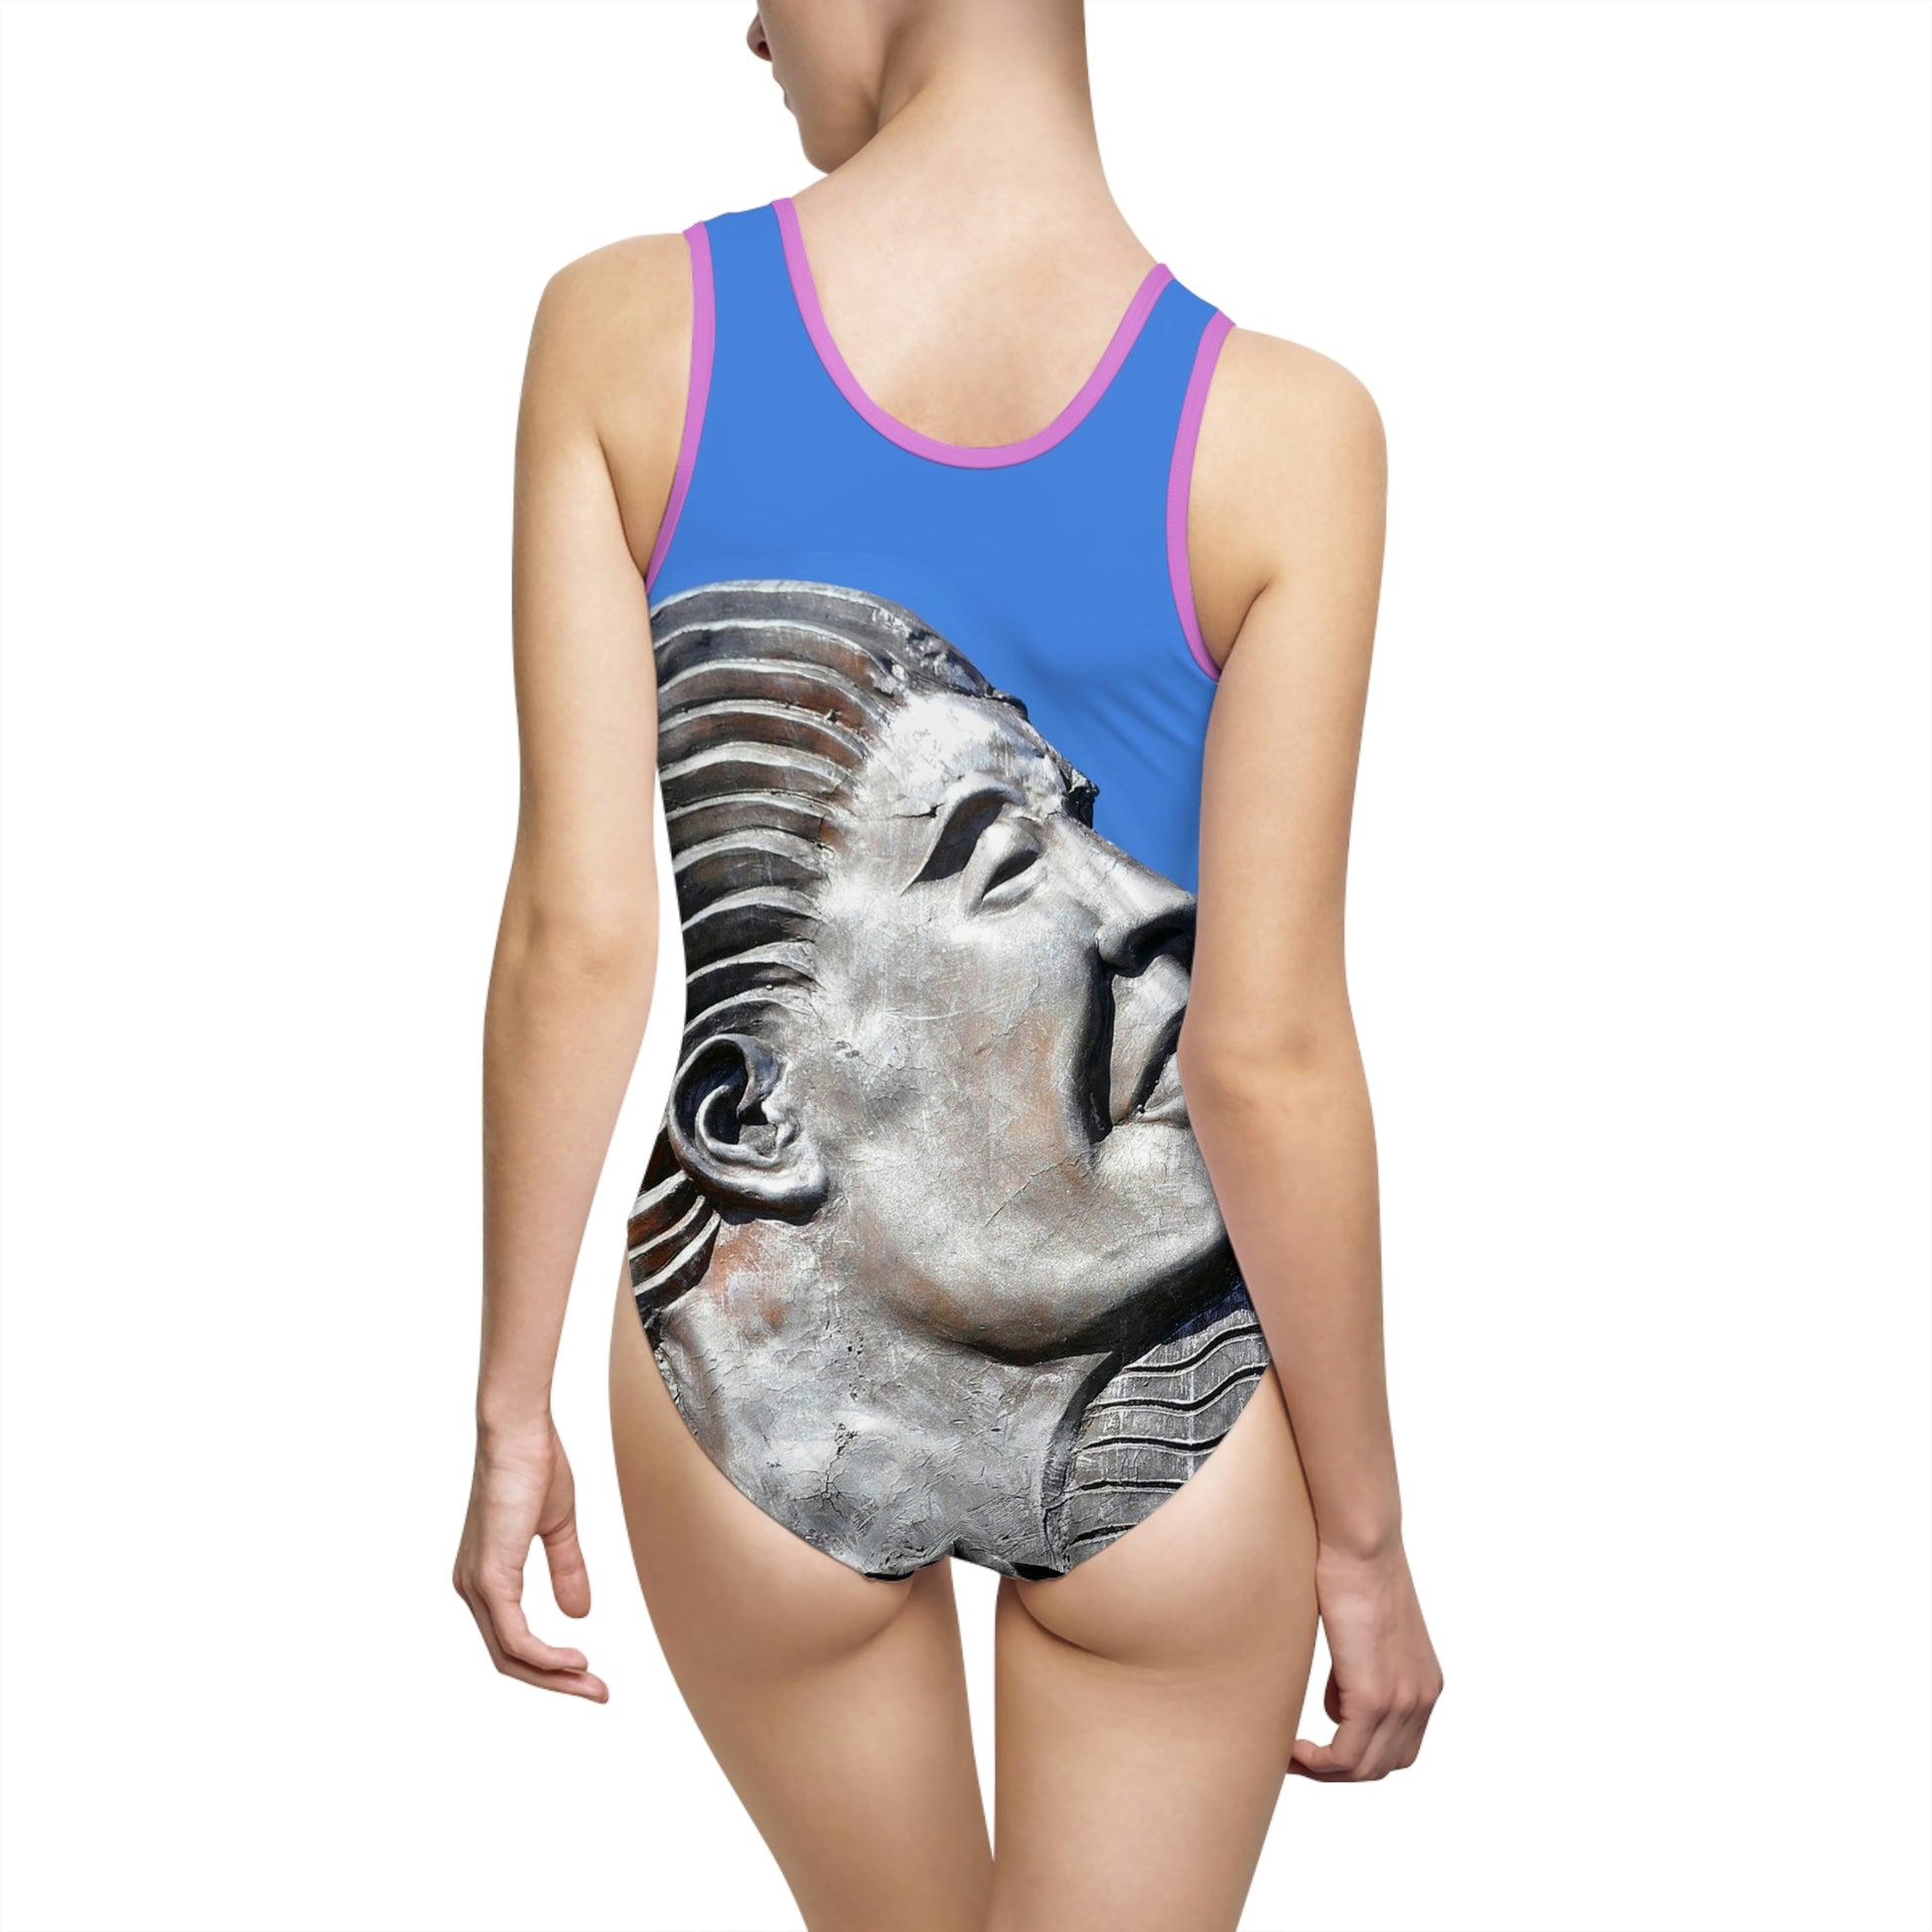 Nymph Beauty - Women's Classic One-Piece Swimsuit - Fry1Productions